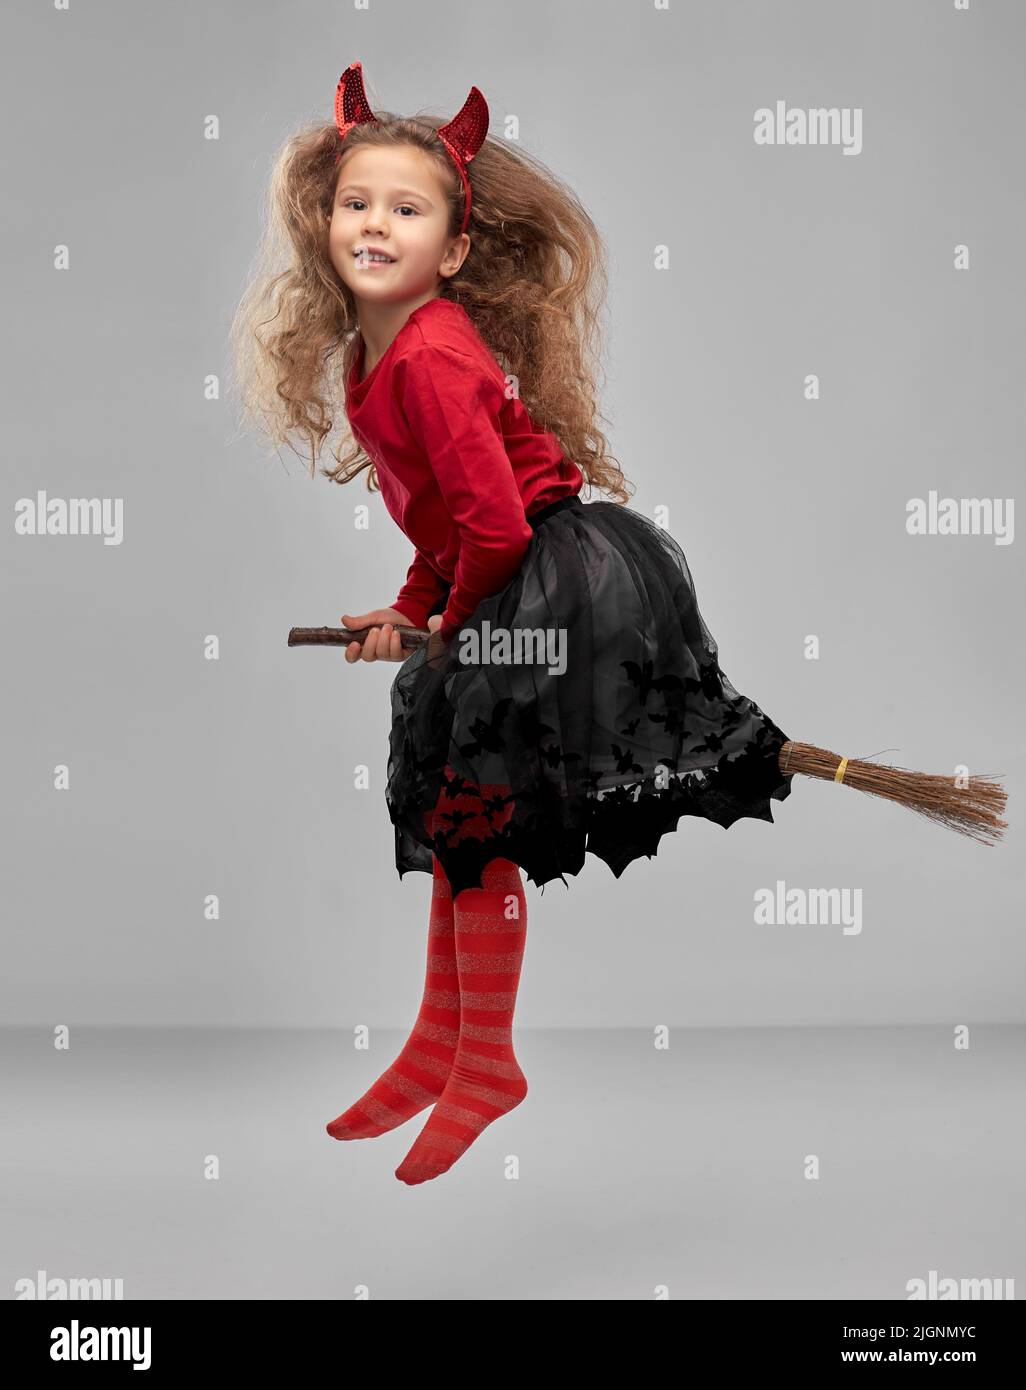 girl in halloween costume flying with witch broom Stock Photo